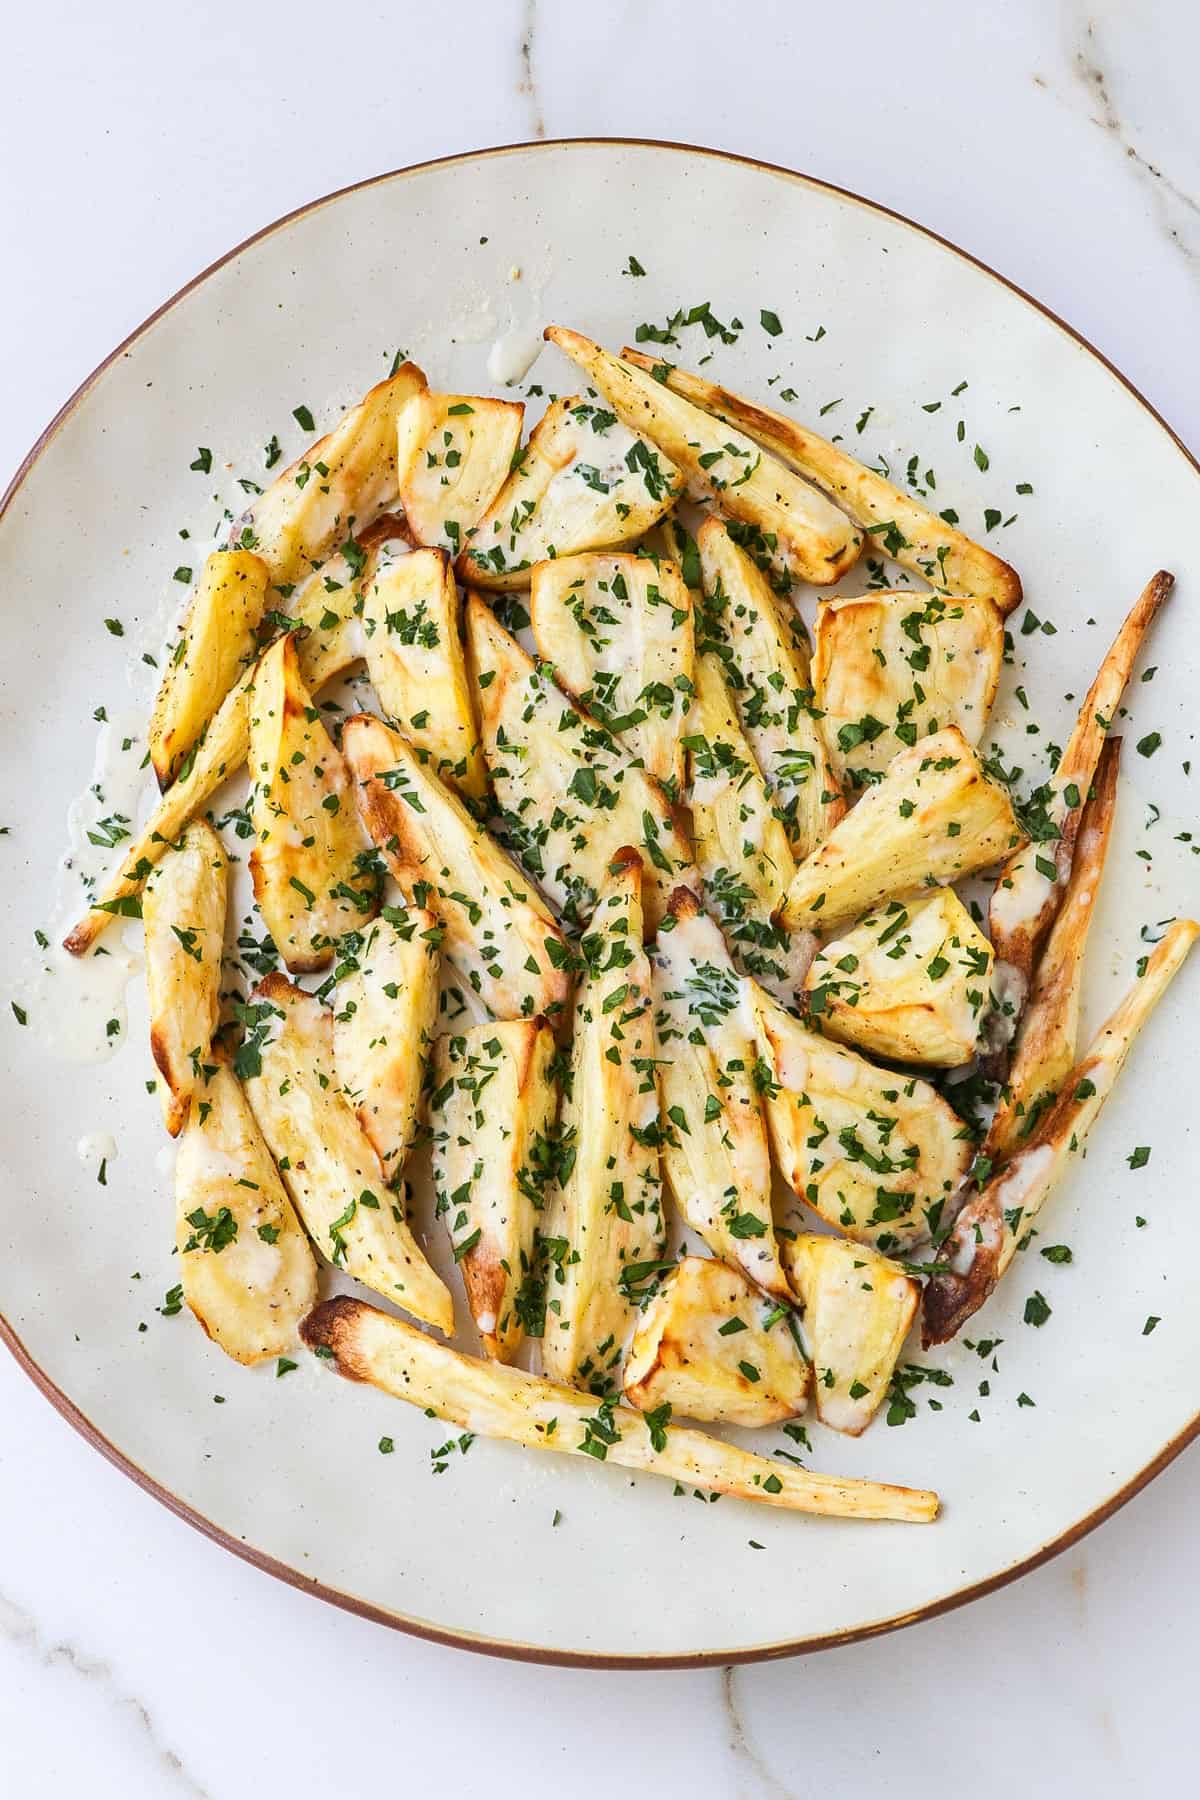 Cooked parsnips on a plate with tahini sauce and parsley.